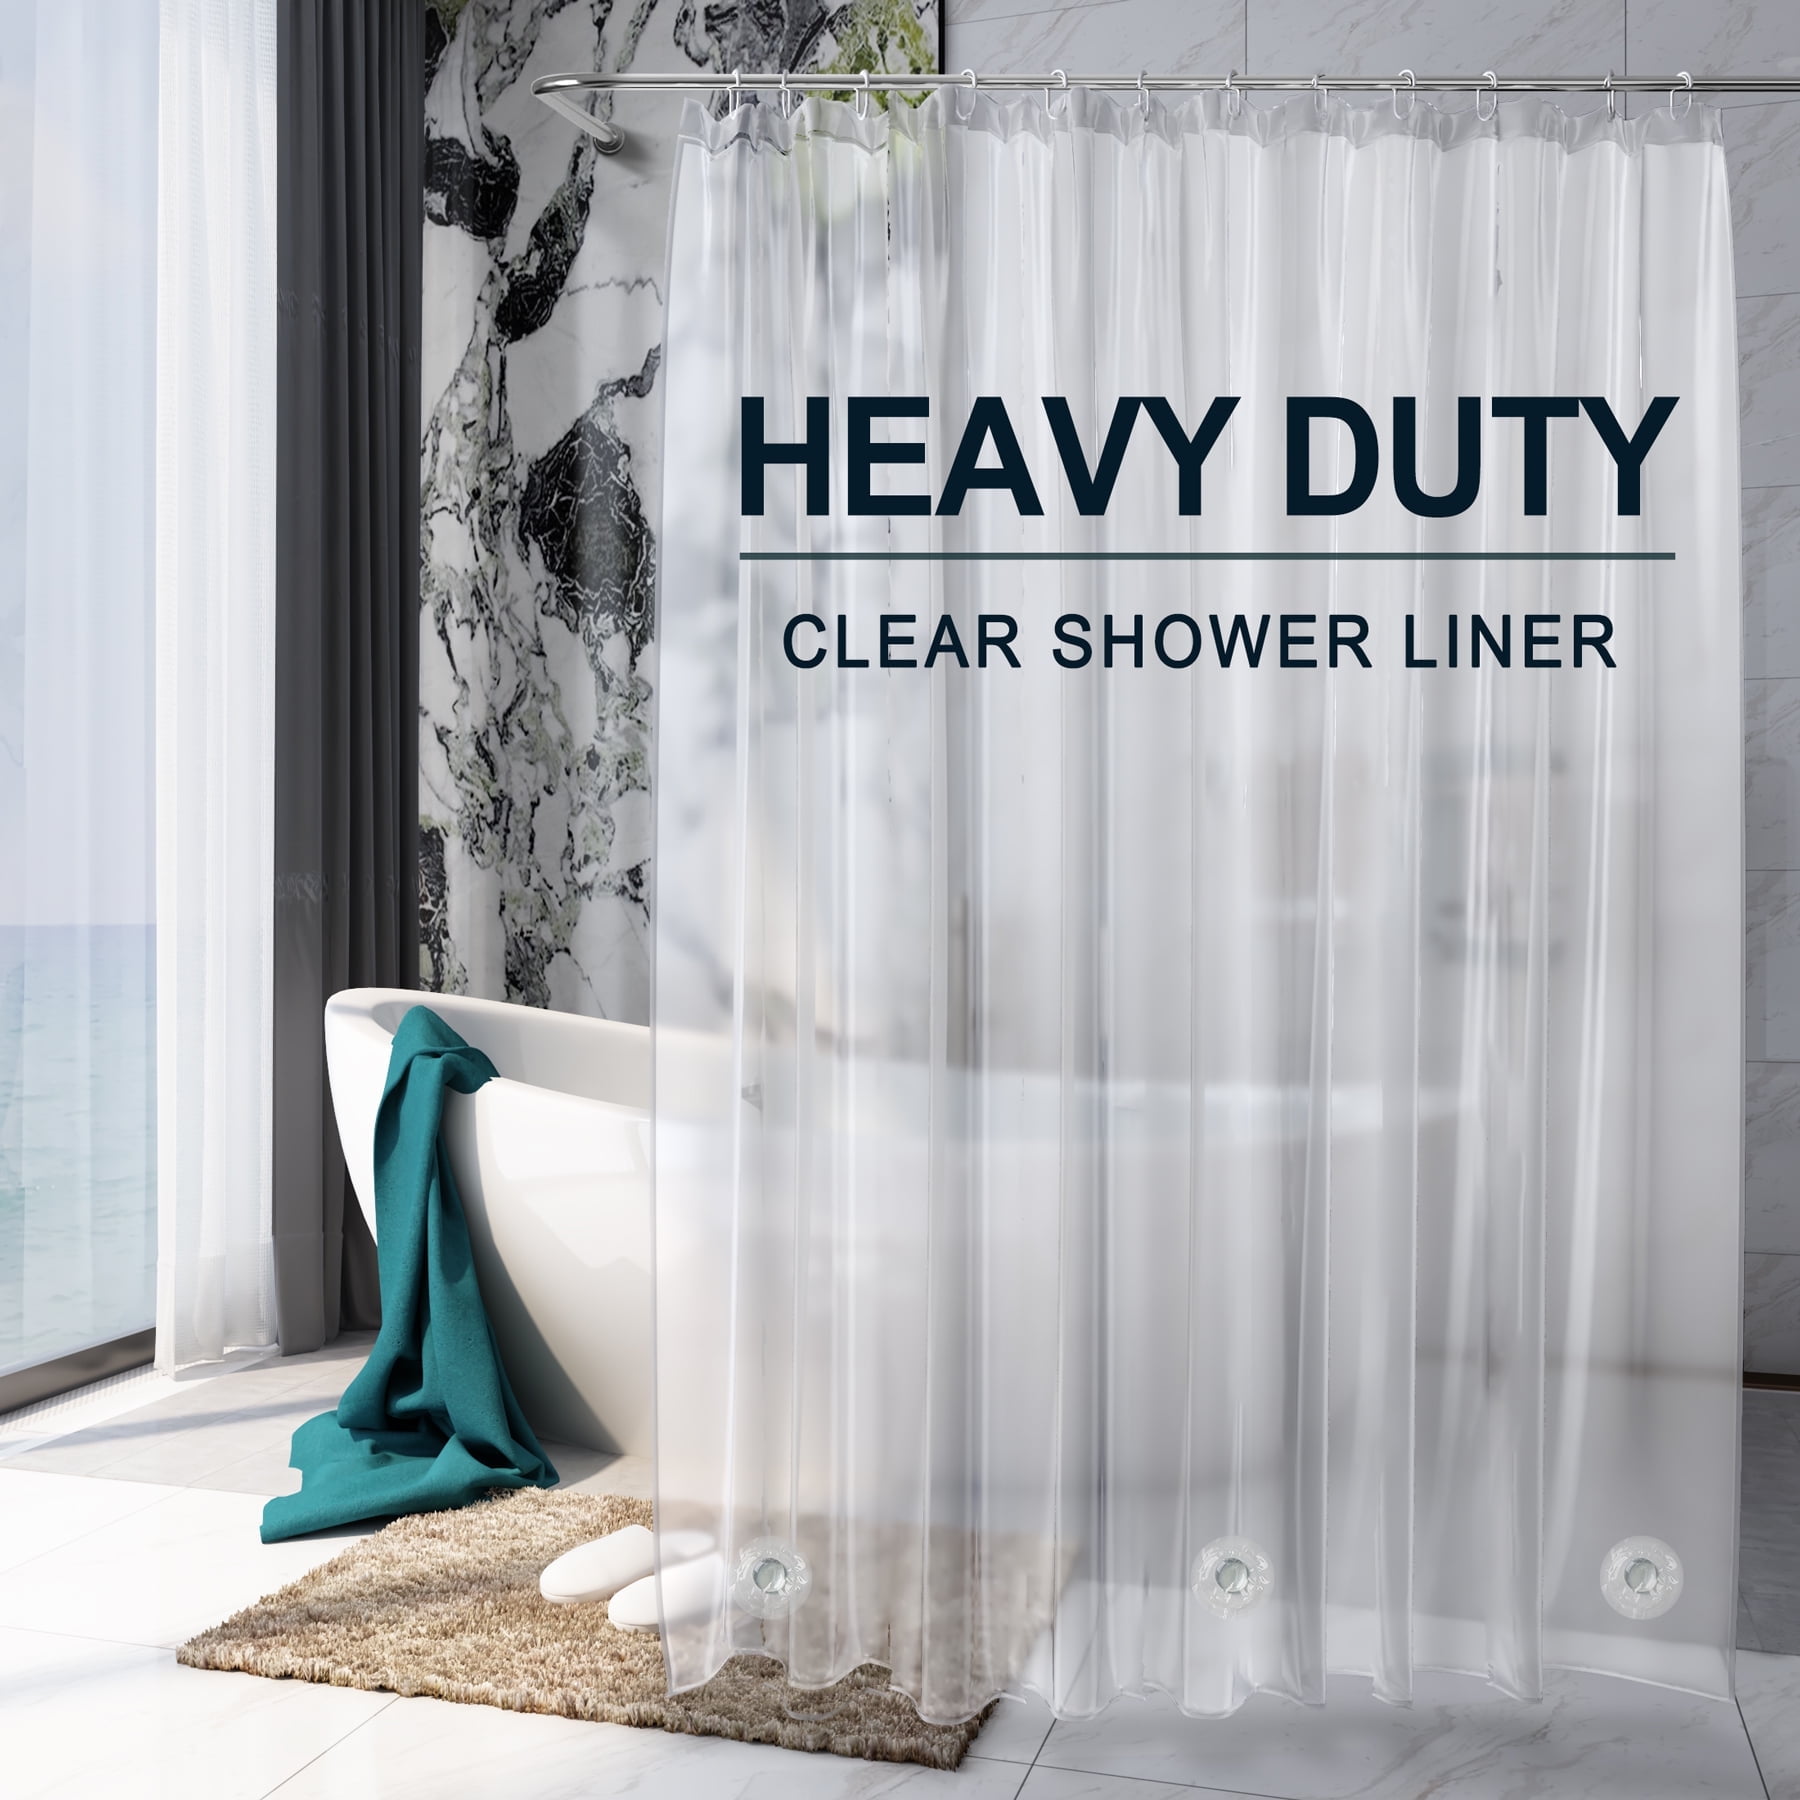 AmazerBath Heavy Duty Shower Curtain Liner 12 Gauge, 72 x 84 Inches Clear Shower  Curtain Liner with 3 Clear Stones and 12 Grommet Holes, Weighted Plastic Shower  Curtain Liner 